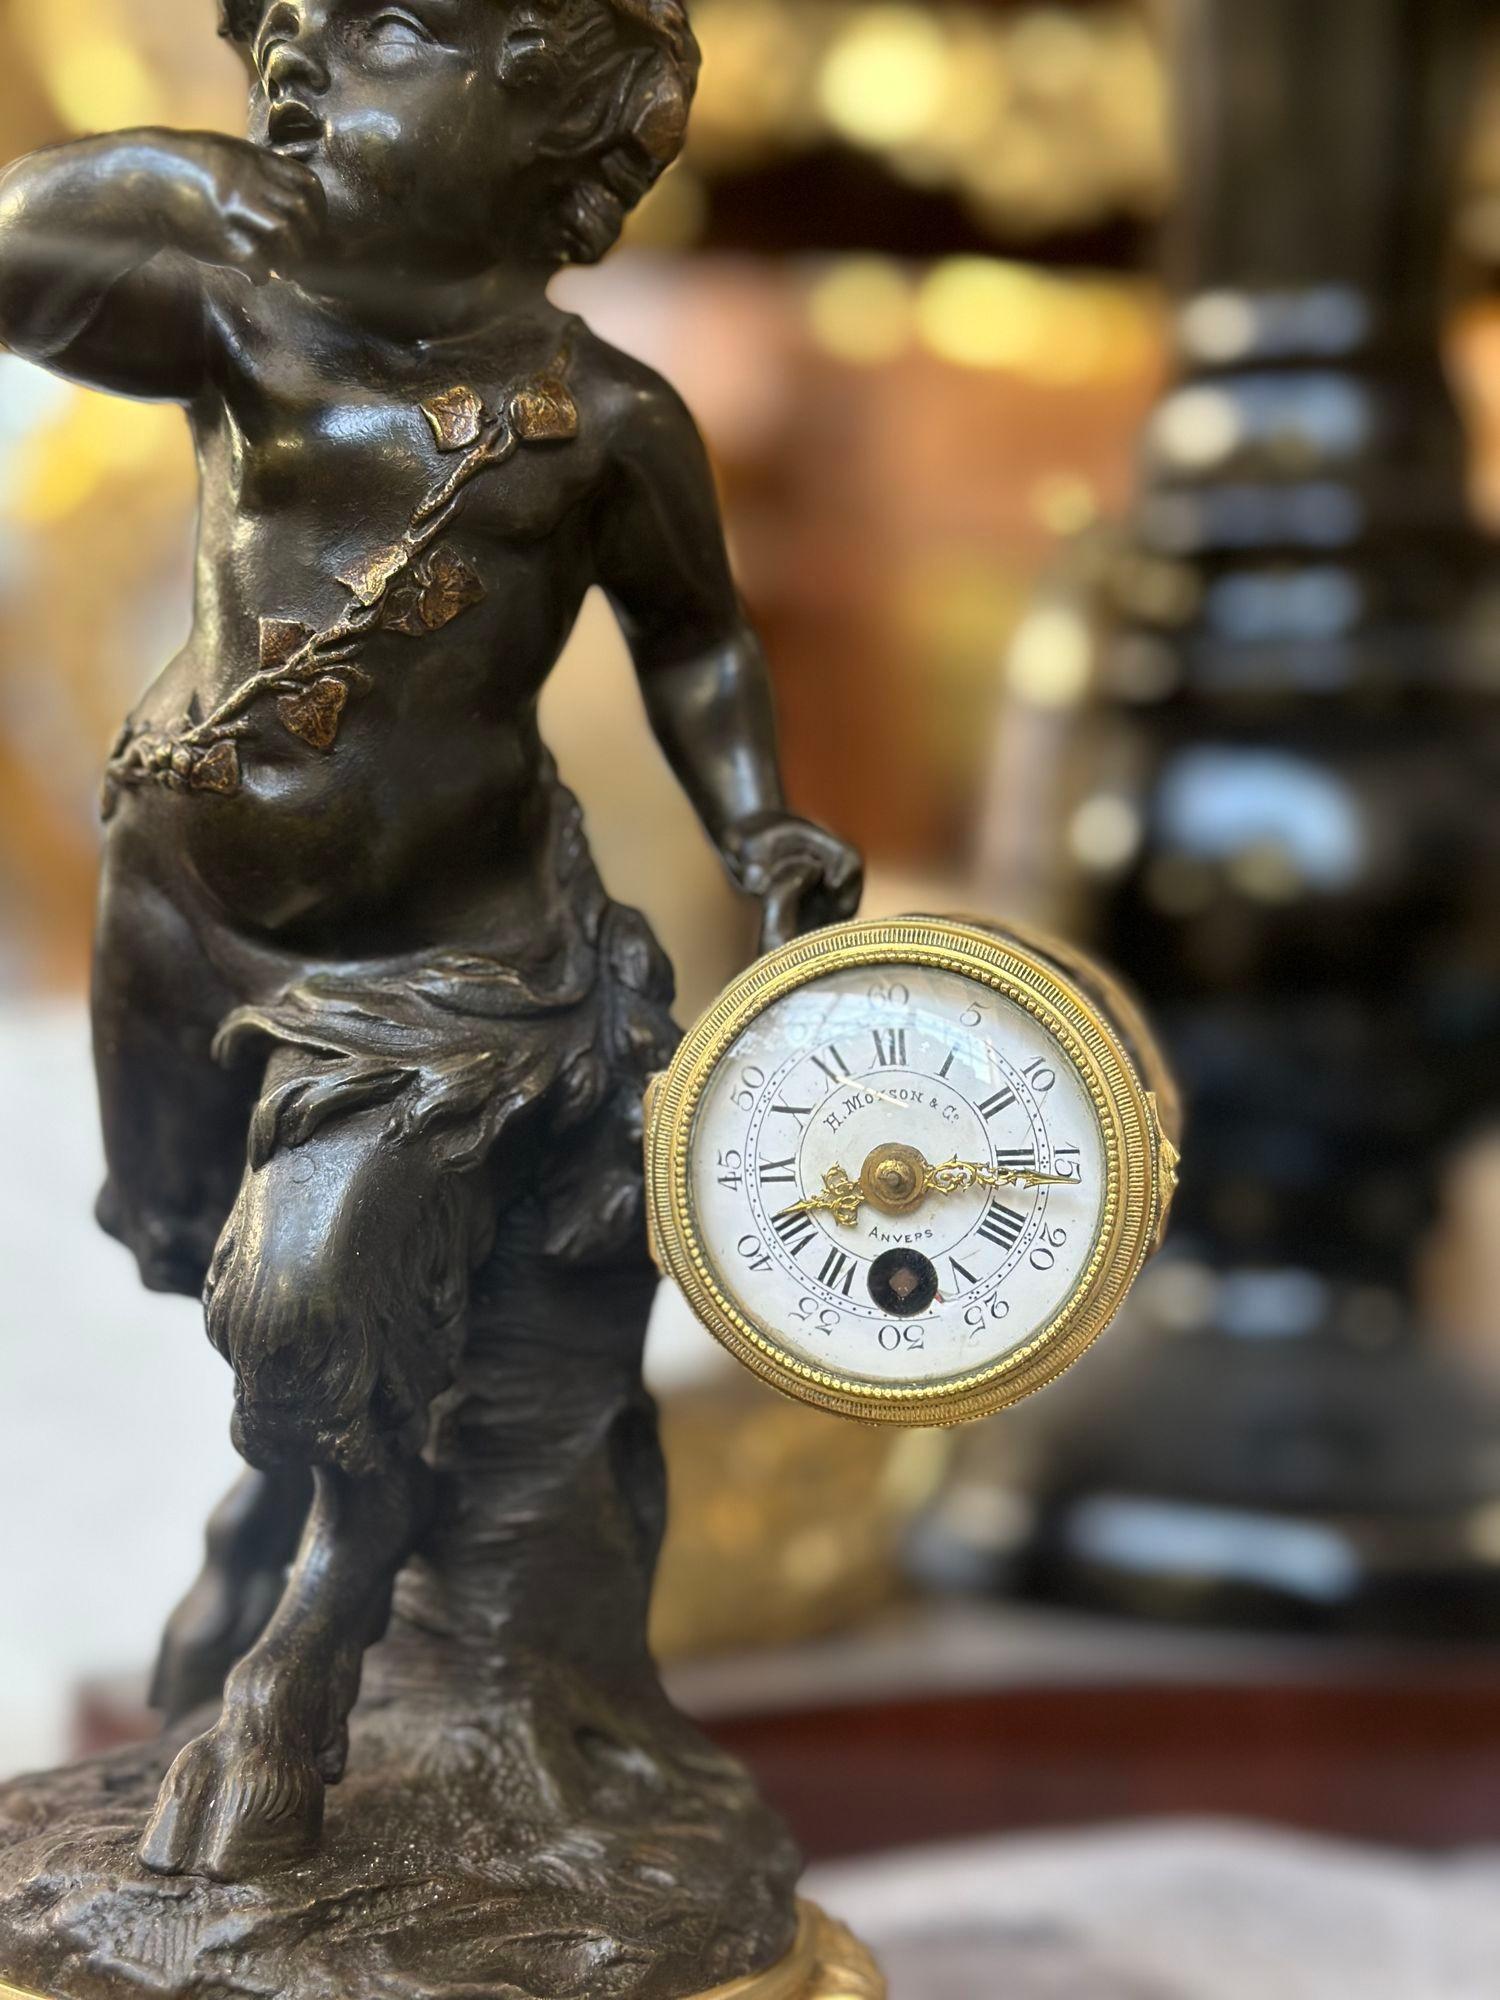 Gorgeous and mythical sculptural clock made of patinated and gilt bronze, depicting a young Bacchanalian faun wearing a leaf crown on his head and a grape leaf sash around his body. He is holding a drum-form clock which is marked 